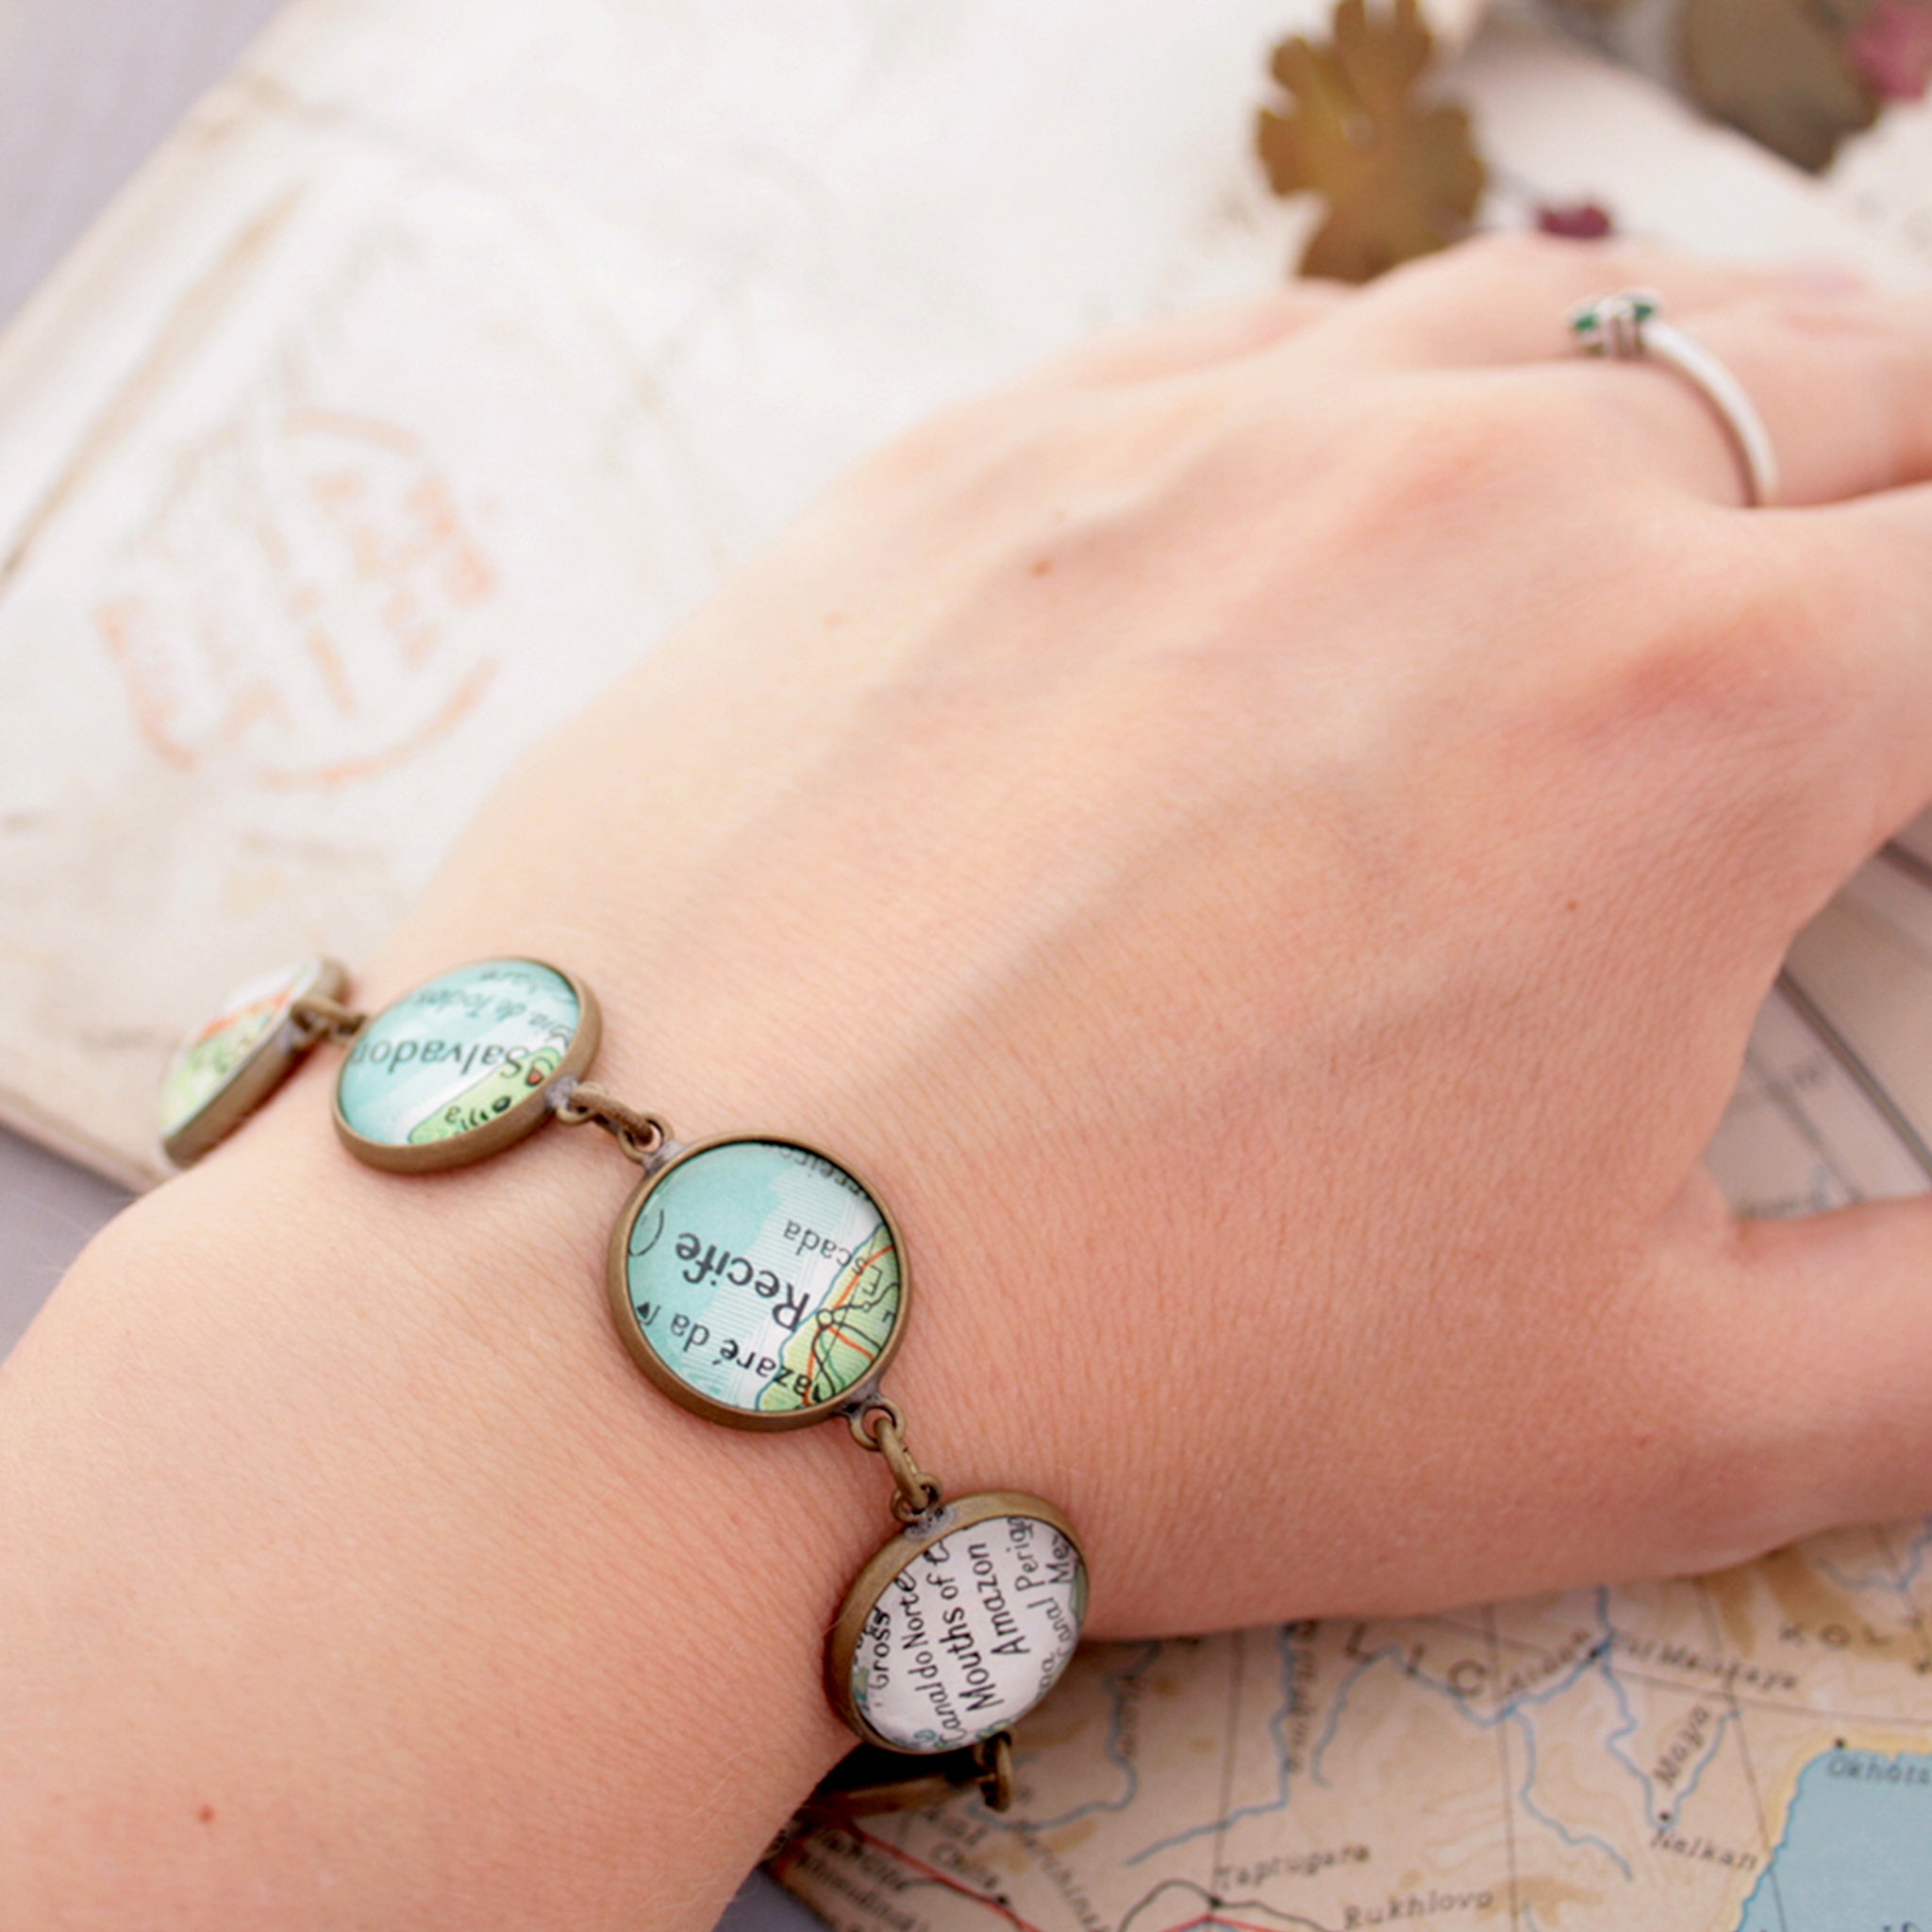 Worn on hand Antique bronze beaded bracelet featuring different map locations